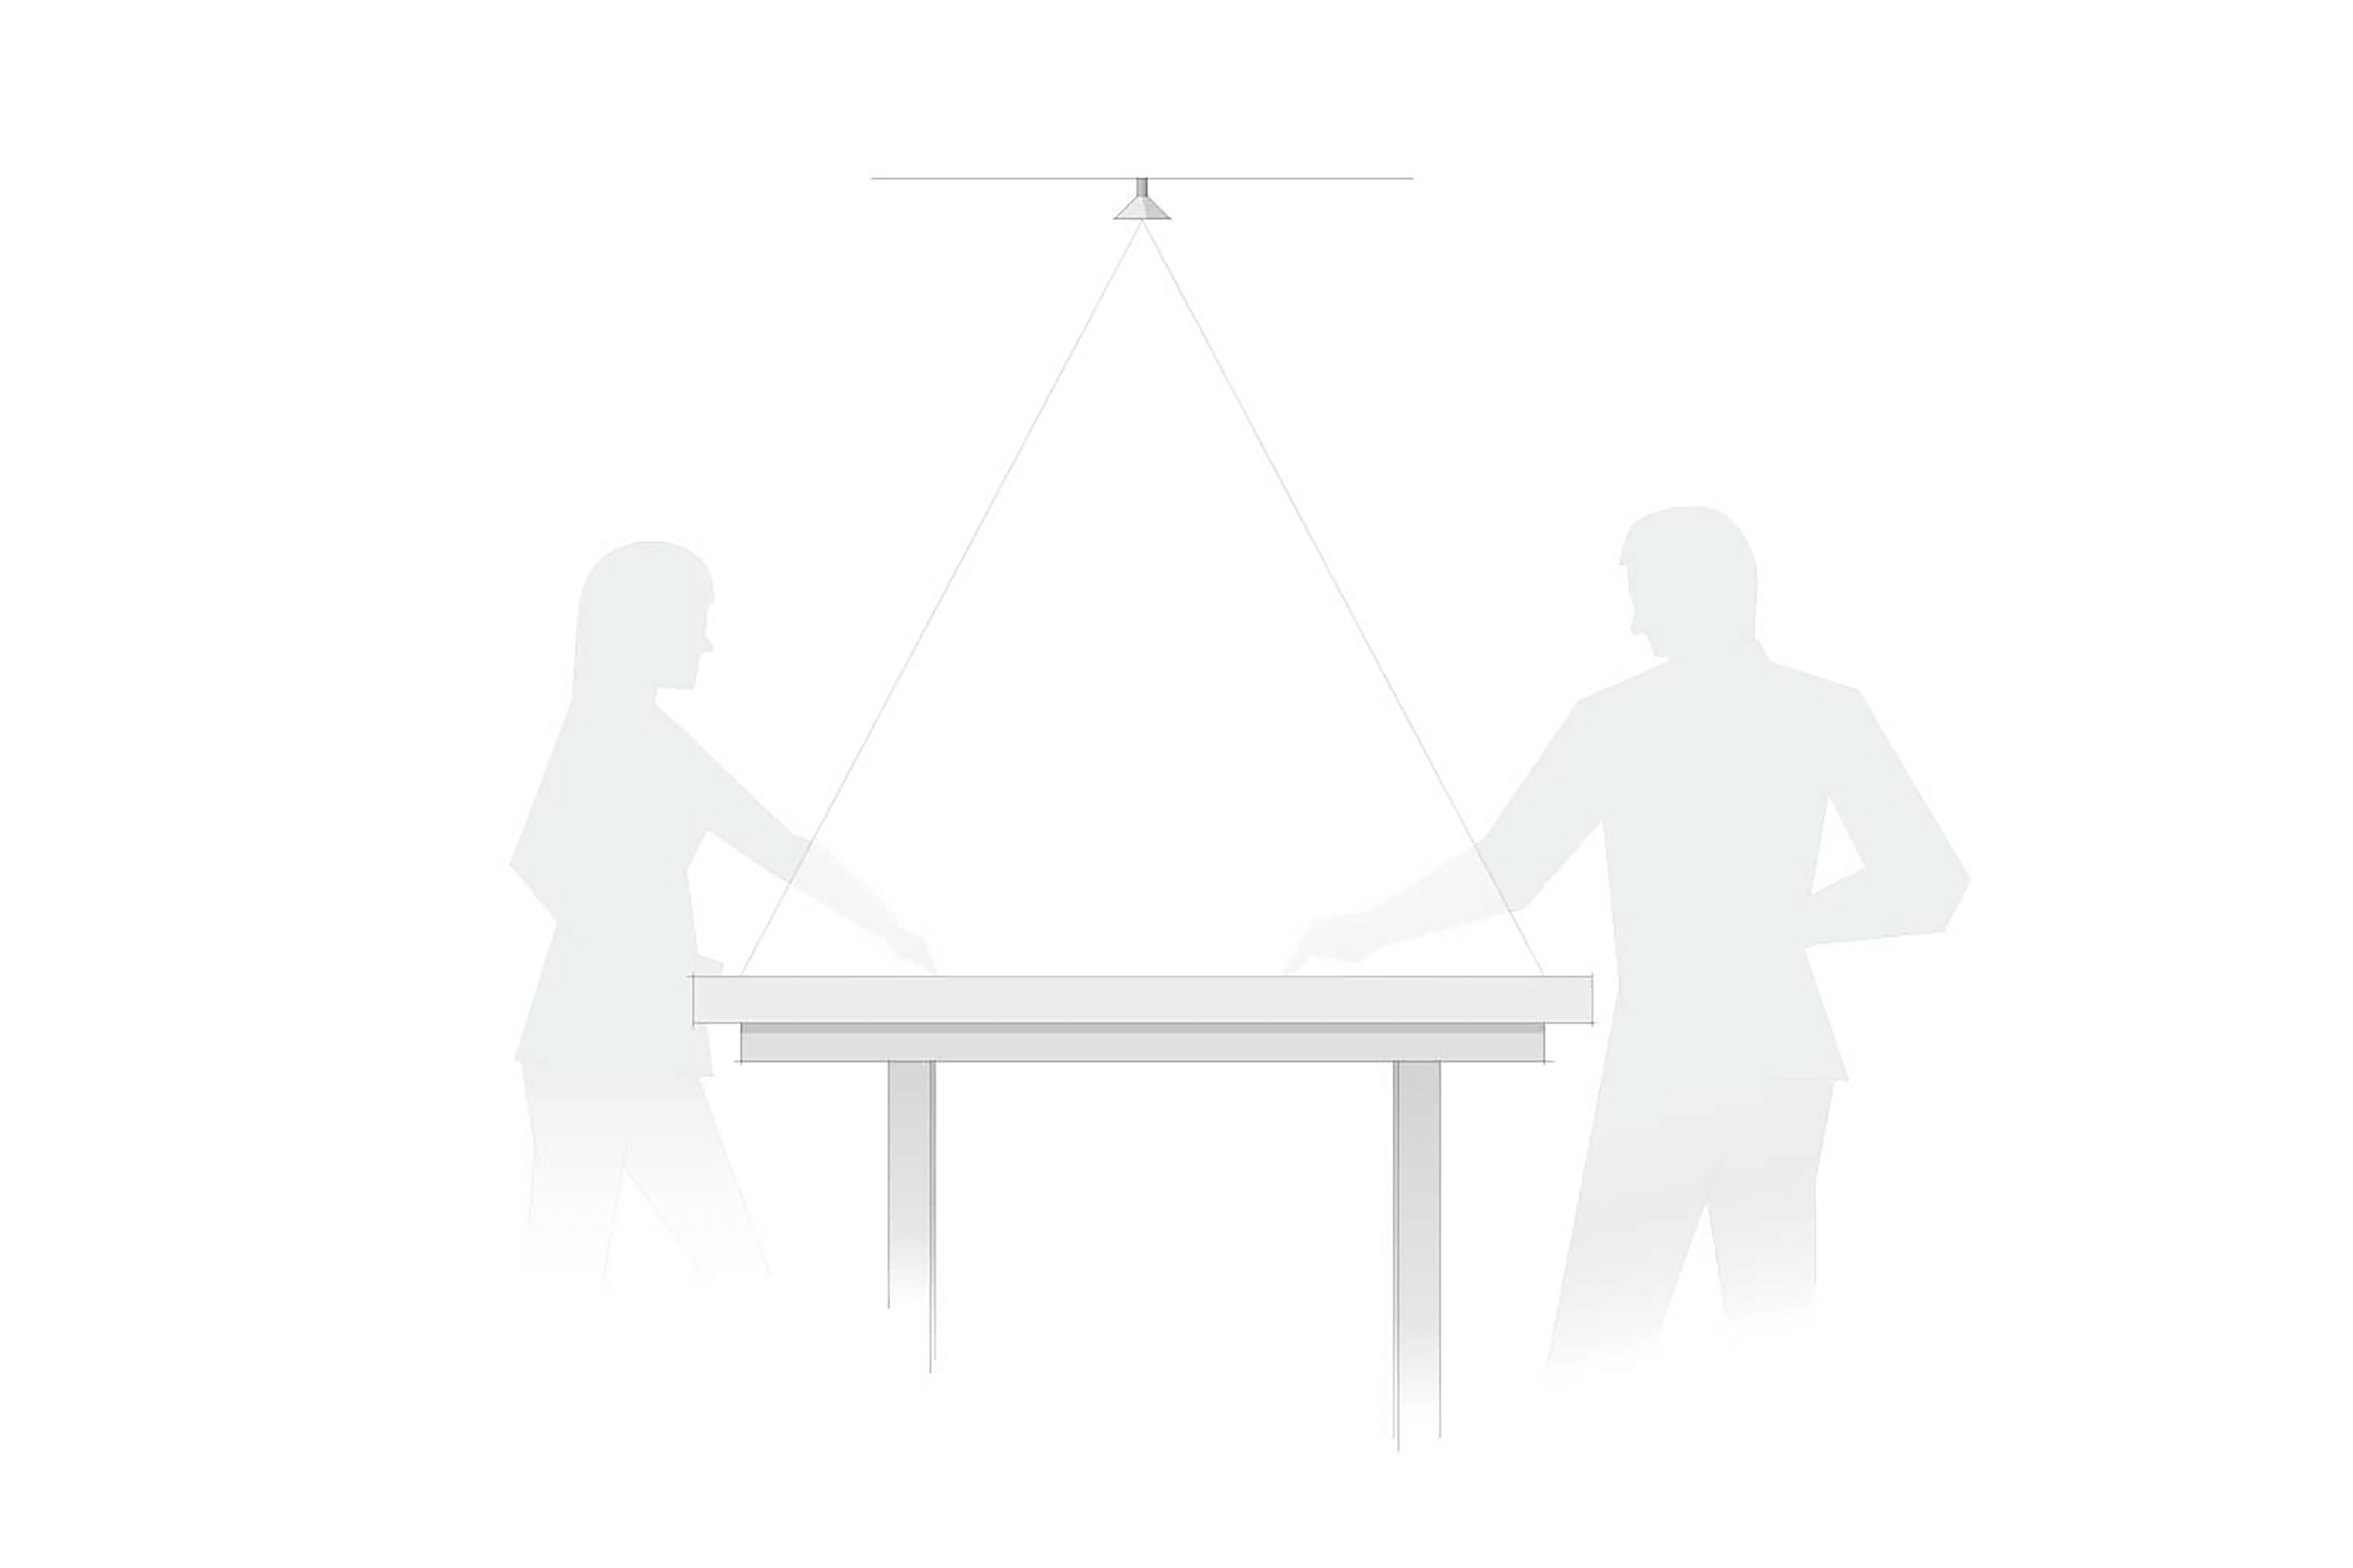 A diagram of Interactive light functionality using an air hockey table as an example surface